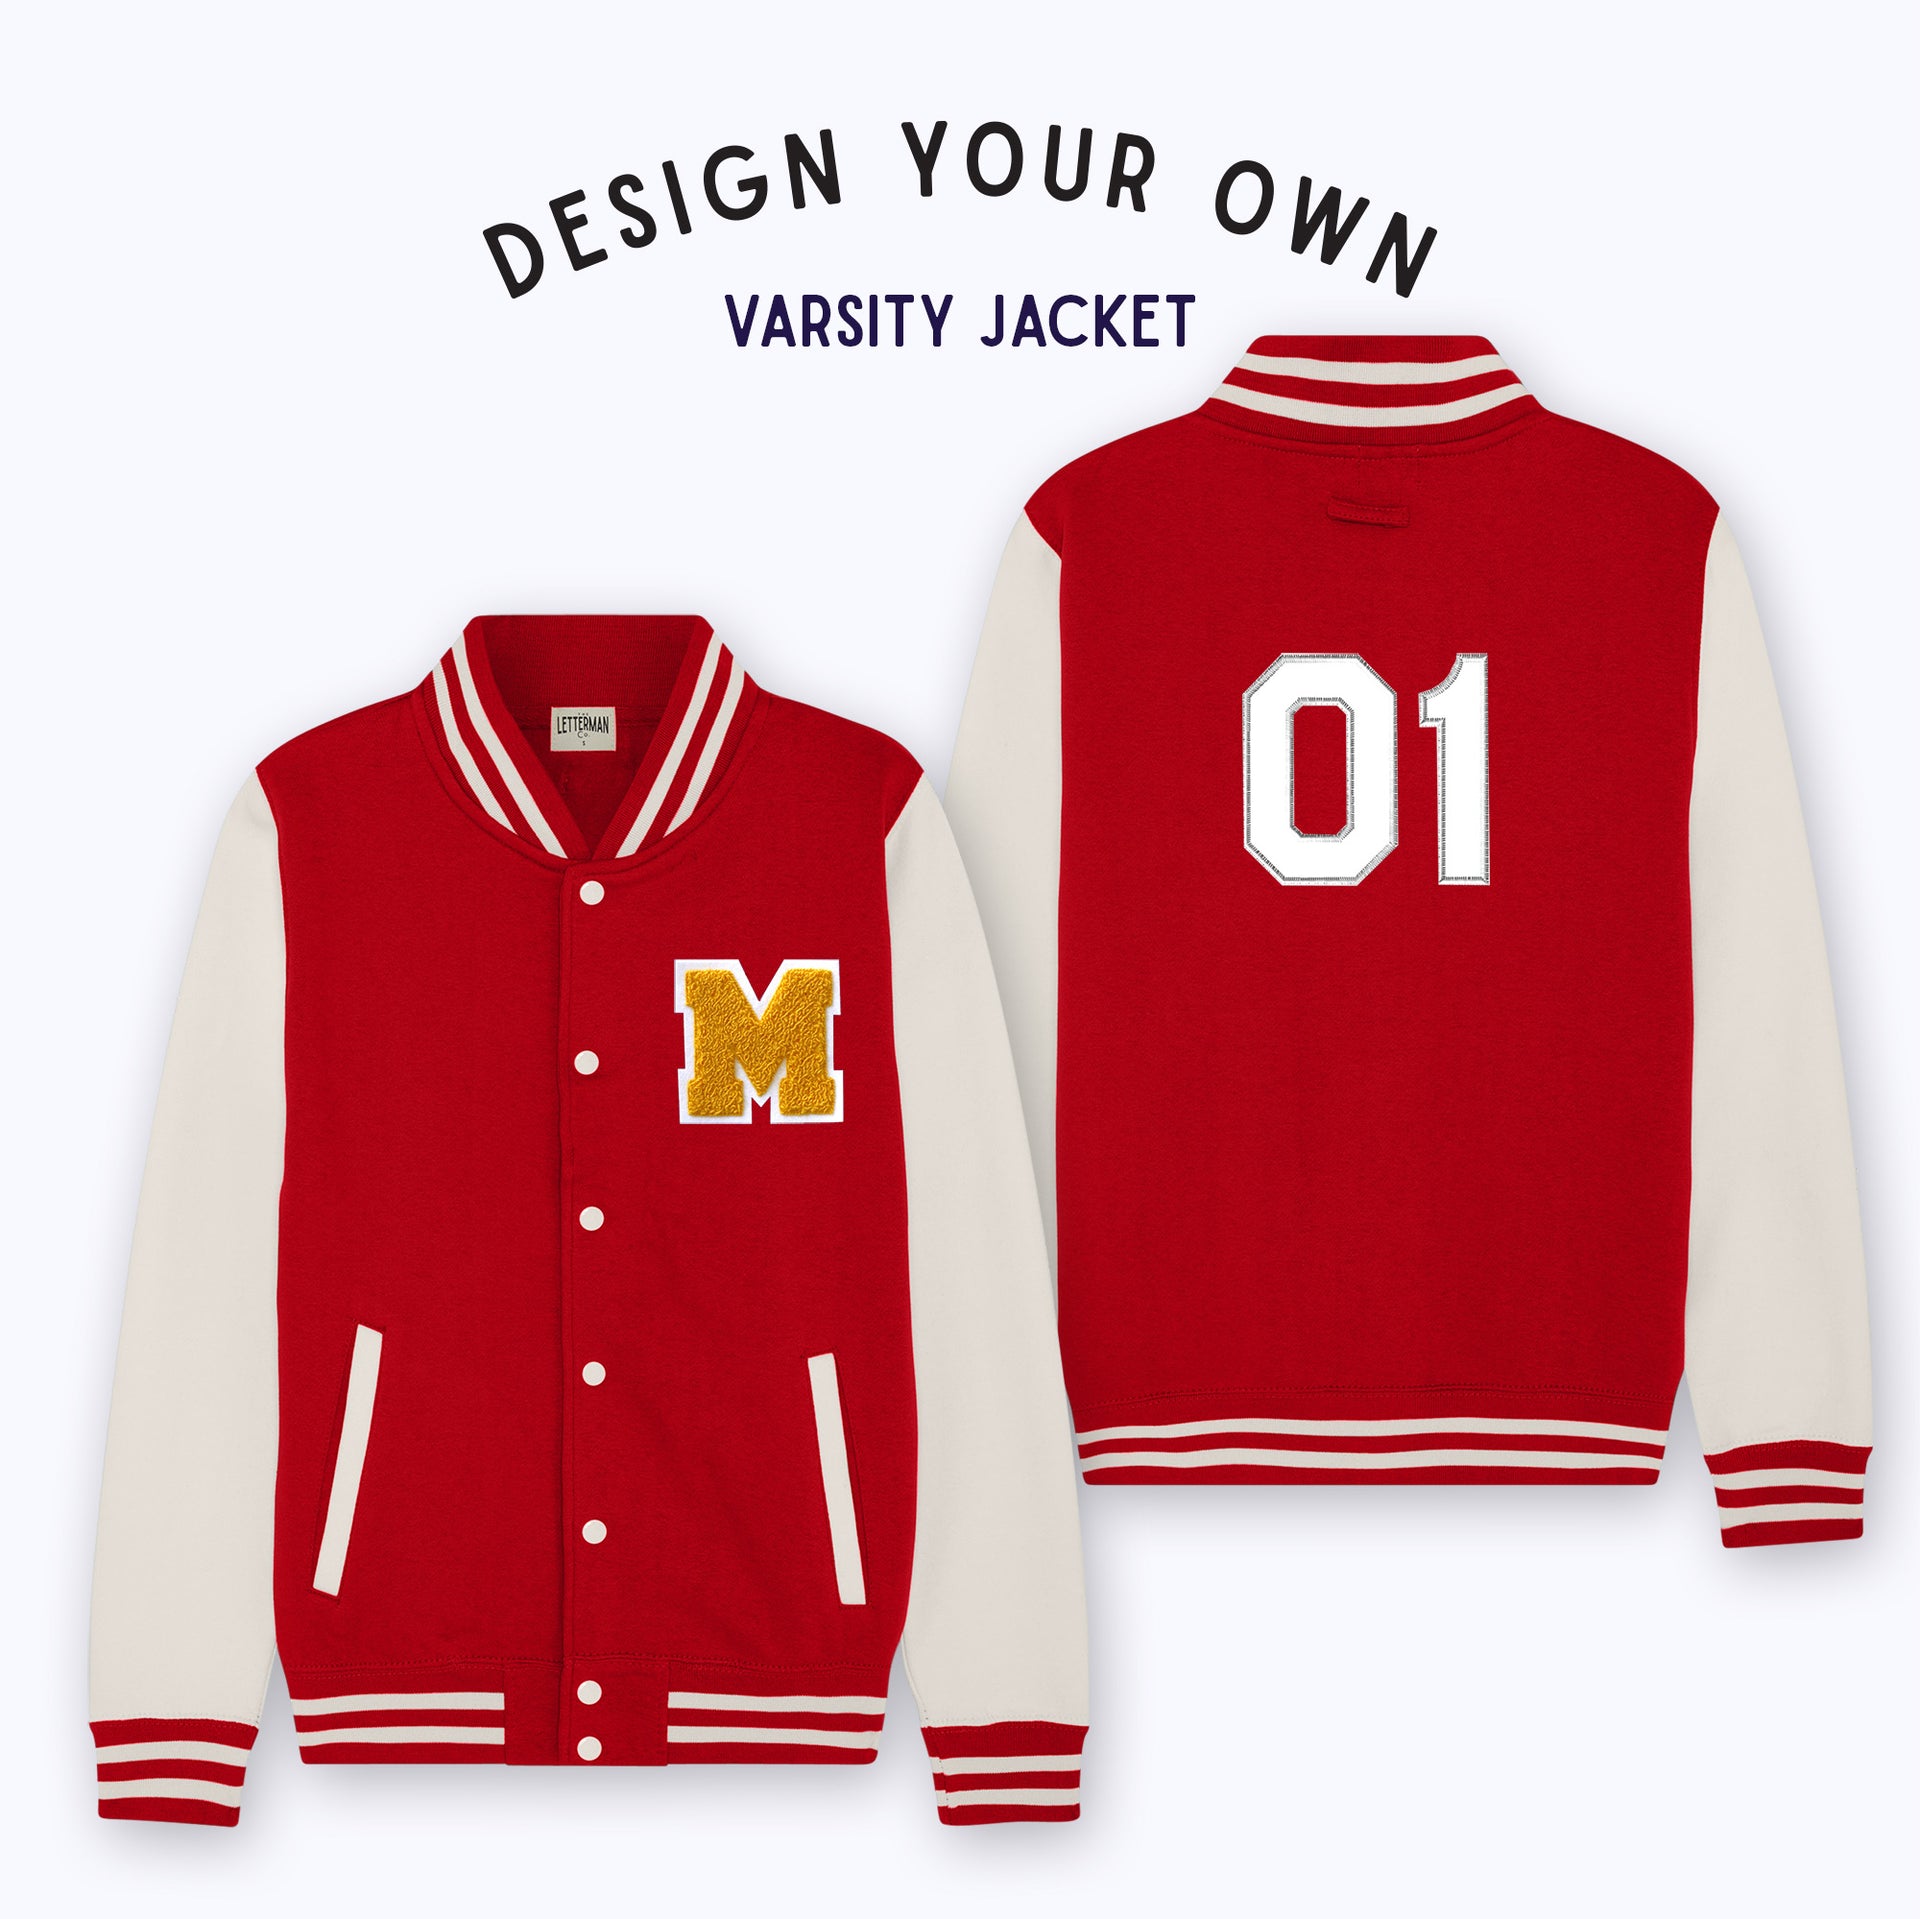 Embroideried Letter Baseball Jacket. Click the page link, log into